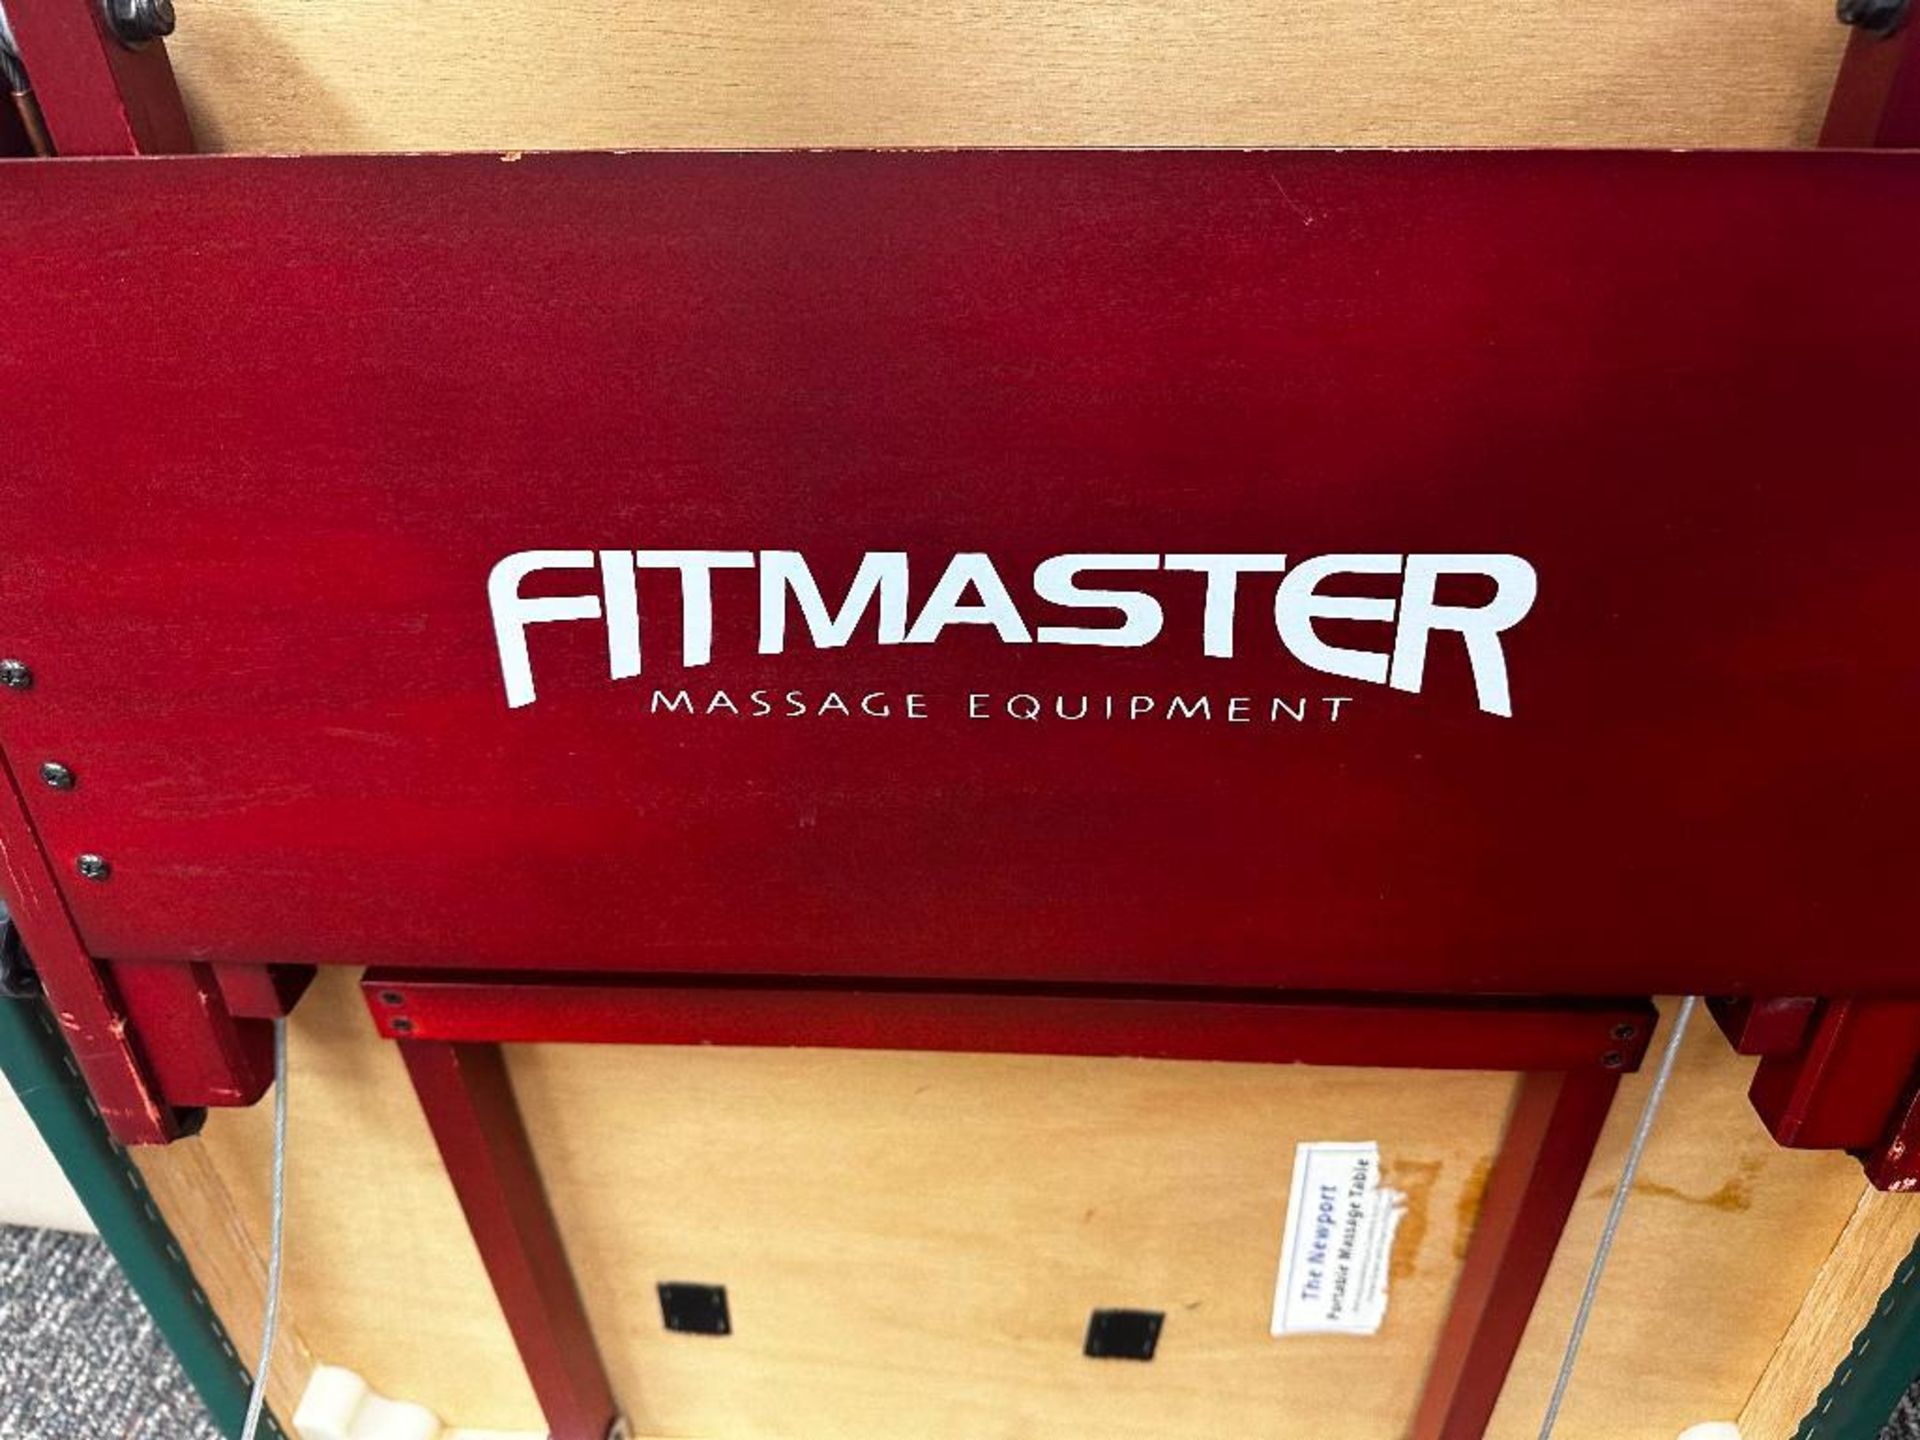 DESCRIPTION: FITMASTER PORTABLE MASSAGE TABLE BRAND / MODEL: FITMASTER LOCATION: MAIN ROOM QTY: 1 - Image 3 of 4